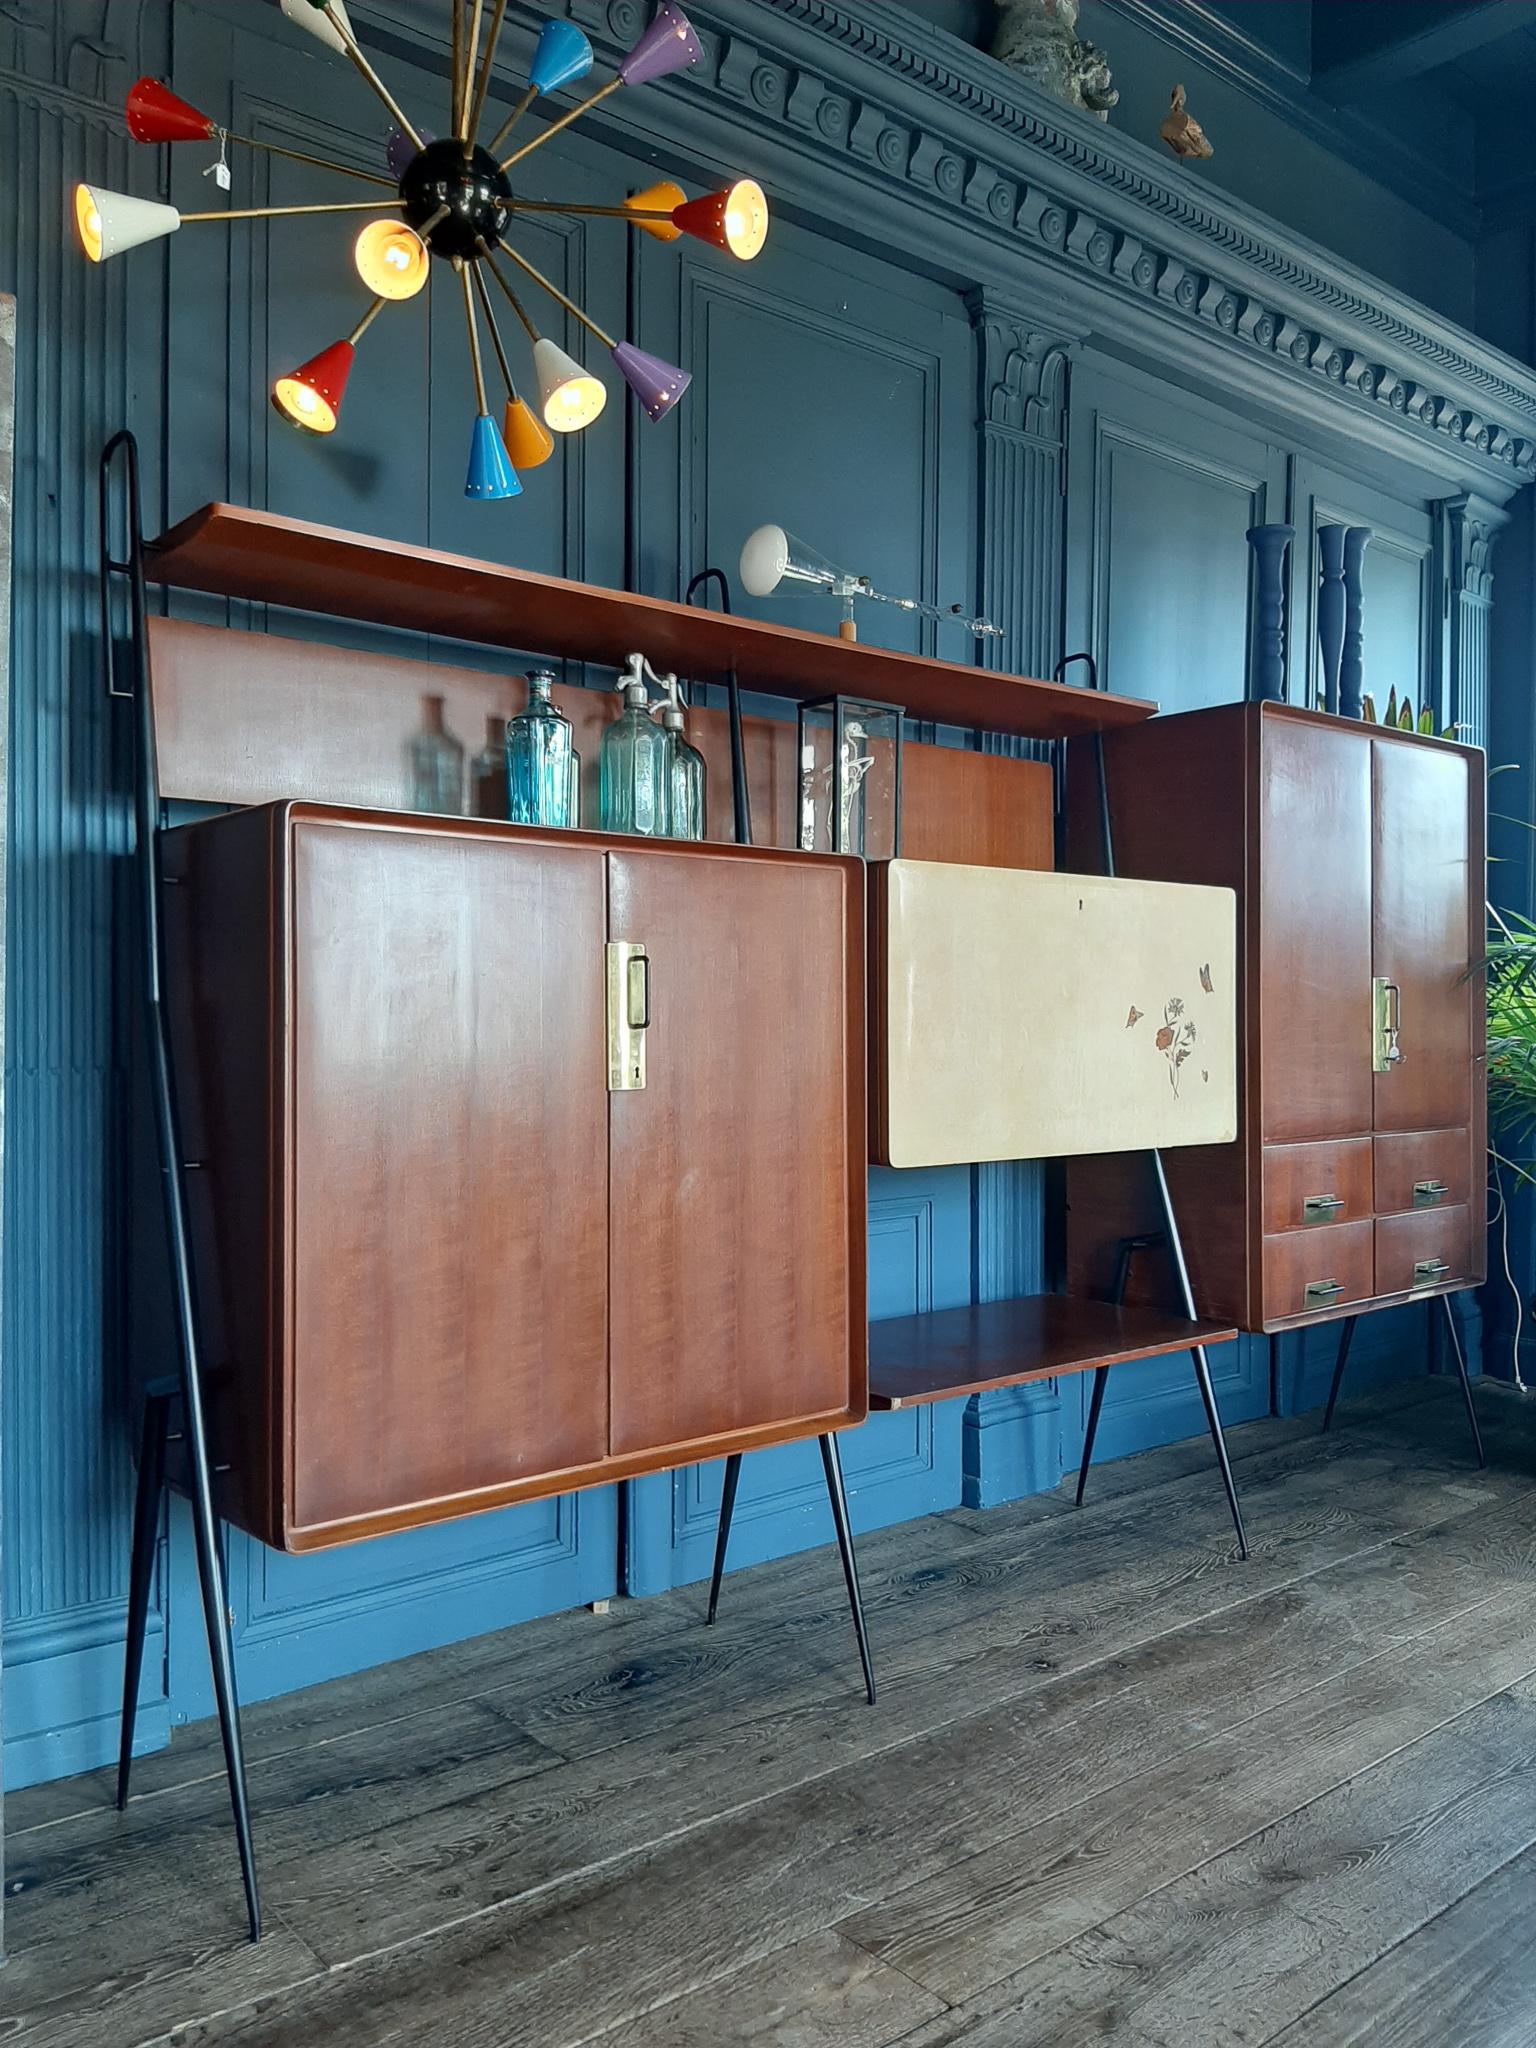 Vintage Italian livingroom furniture by Silvio Cavatorta with bar cabinet, storage space, bookshelves and bar. This Mid-Century Modern design wall unit / sideboard /buffet /bookcase is made in the 1960s. Made of teak veneerd wood, with brass handles